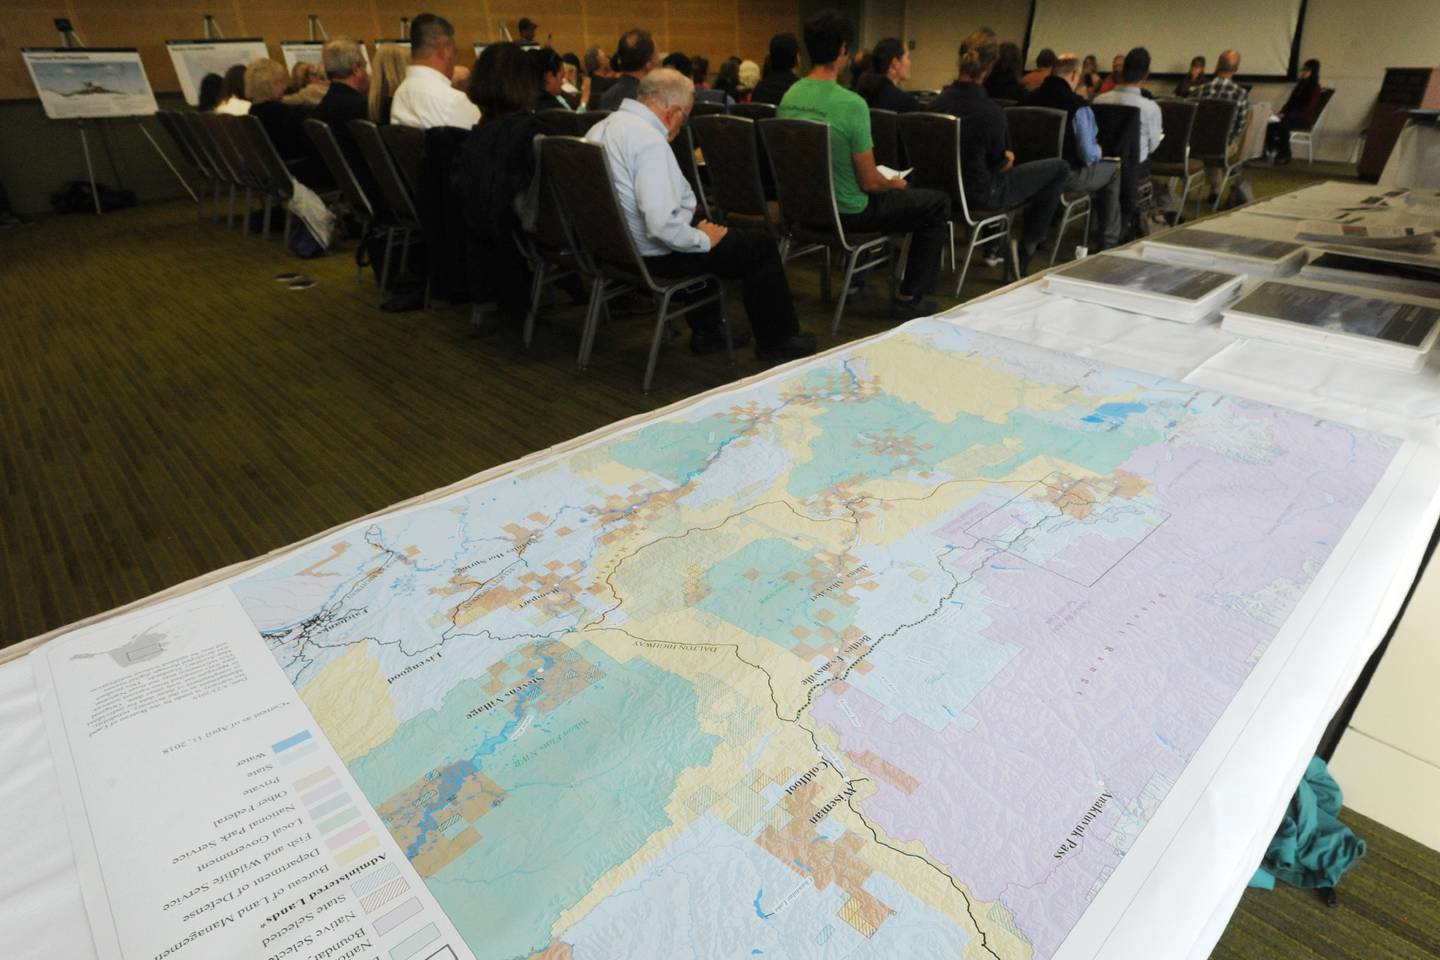 BLM Proposed Ambler Road Draft EIS public meeting/hearing at the Dena'ina Center